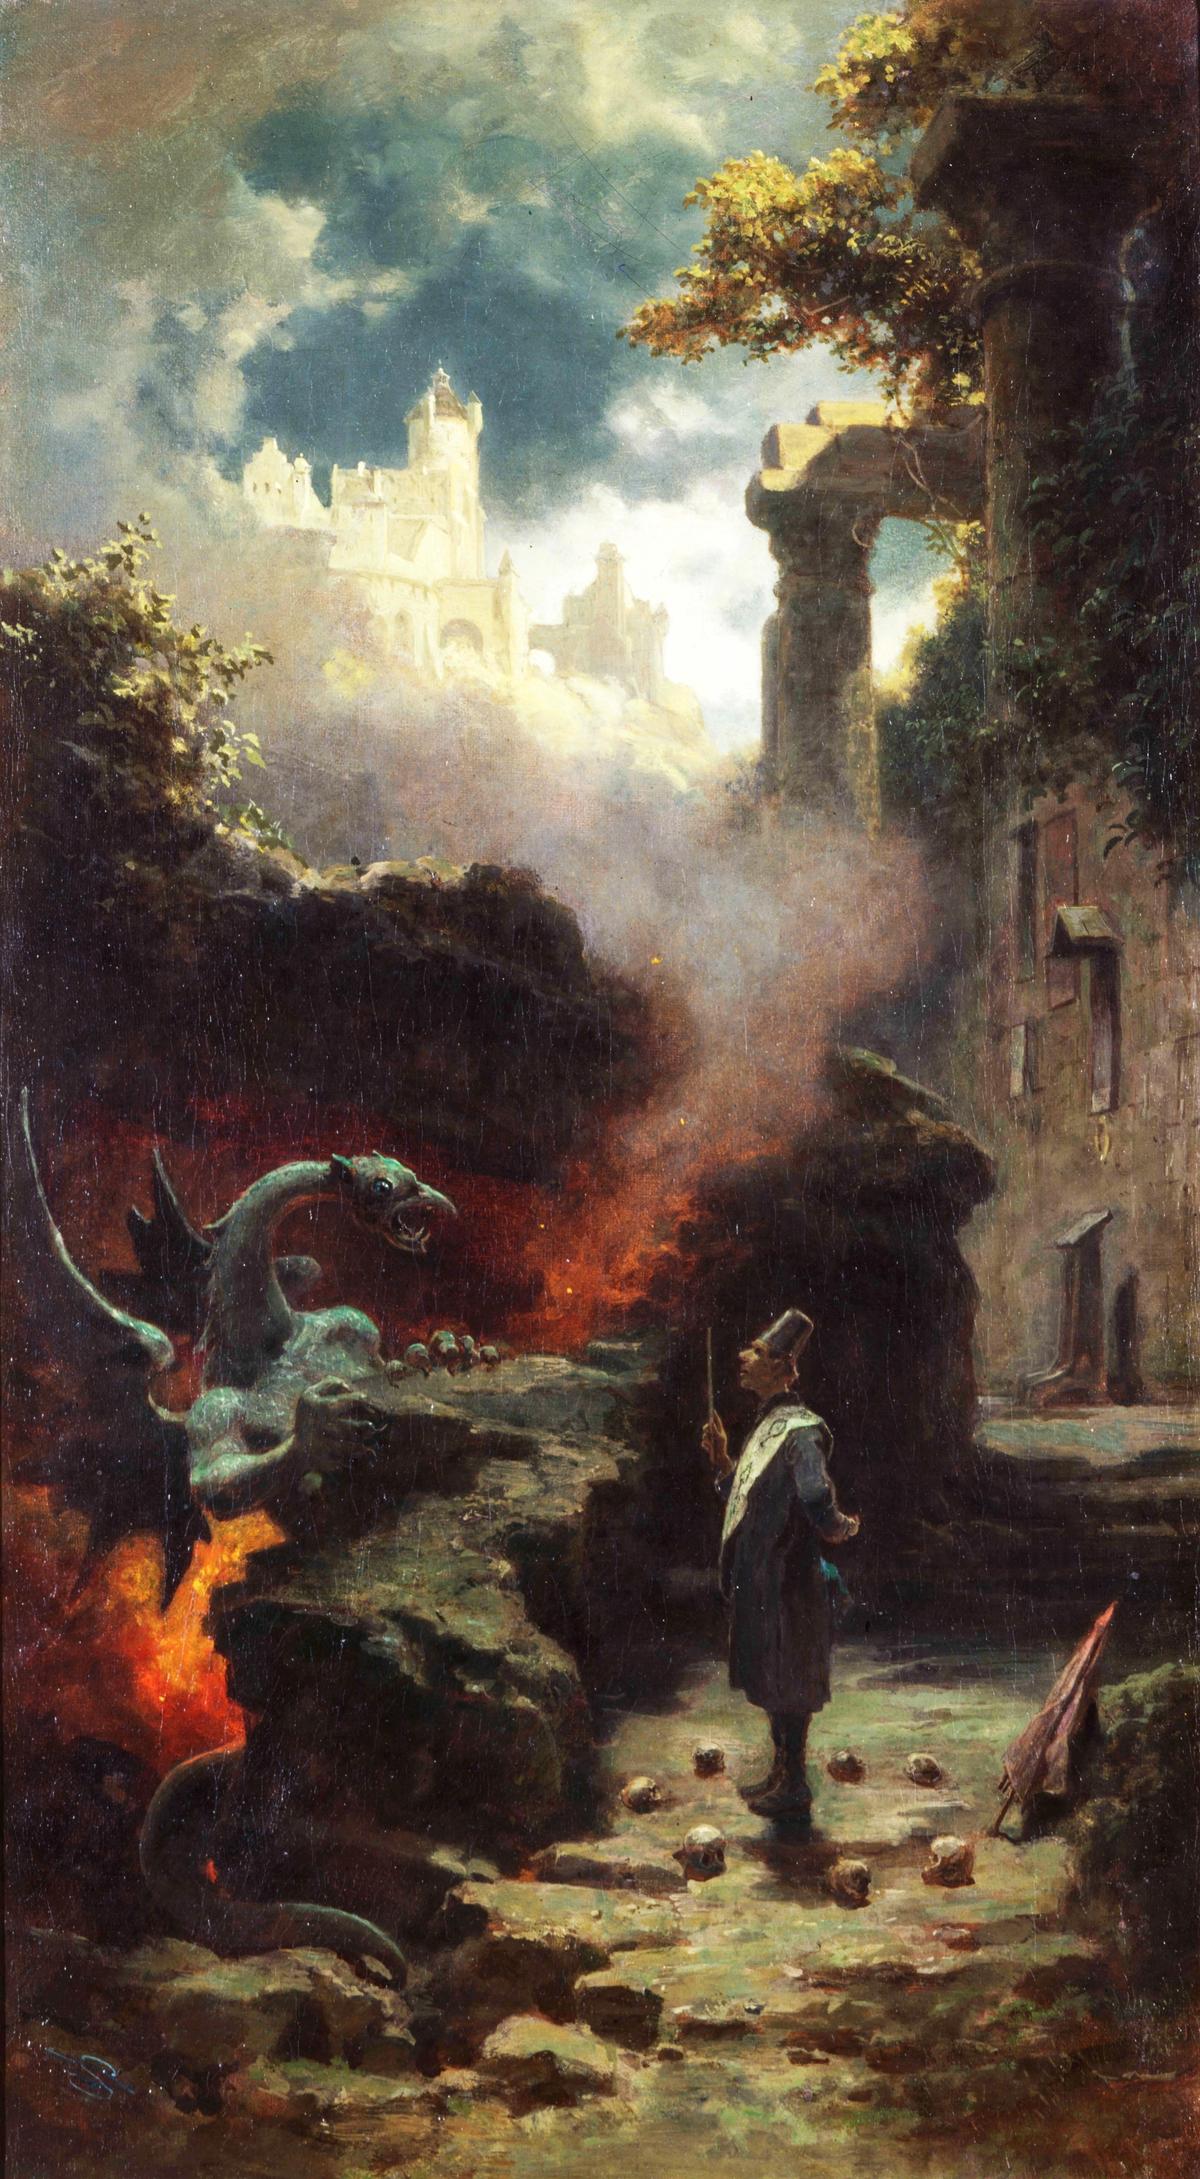 Carl Spitzweg's Der Hexenmeister has been returned to the heirs of Leo Bendel 